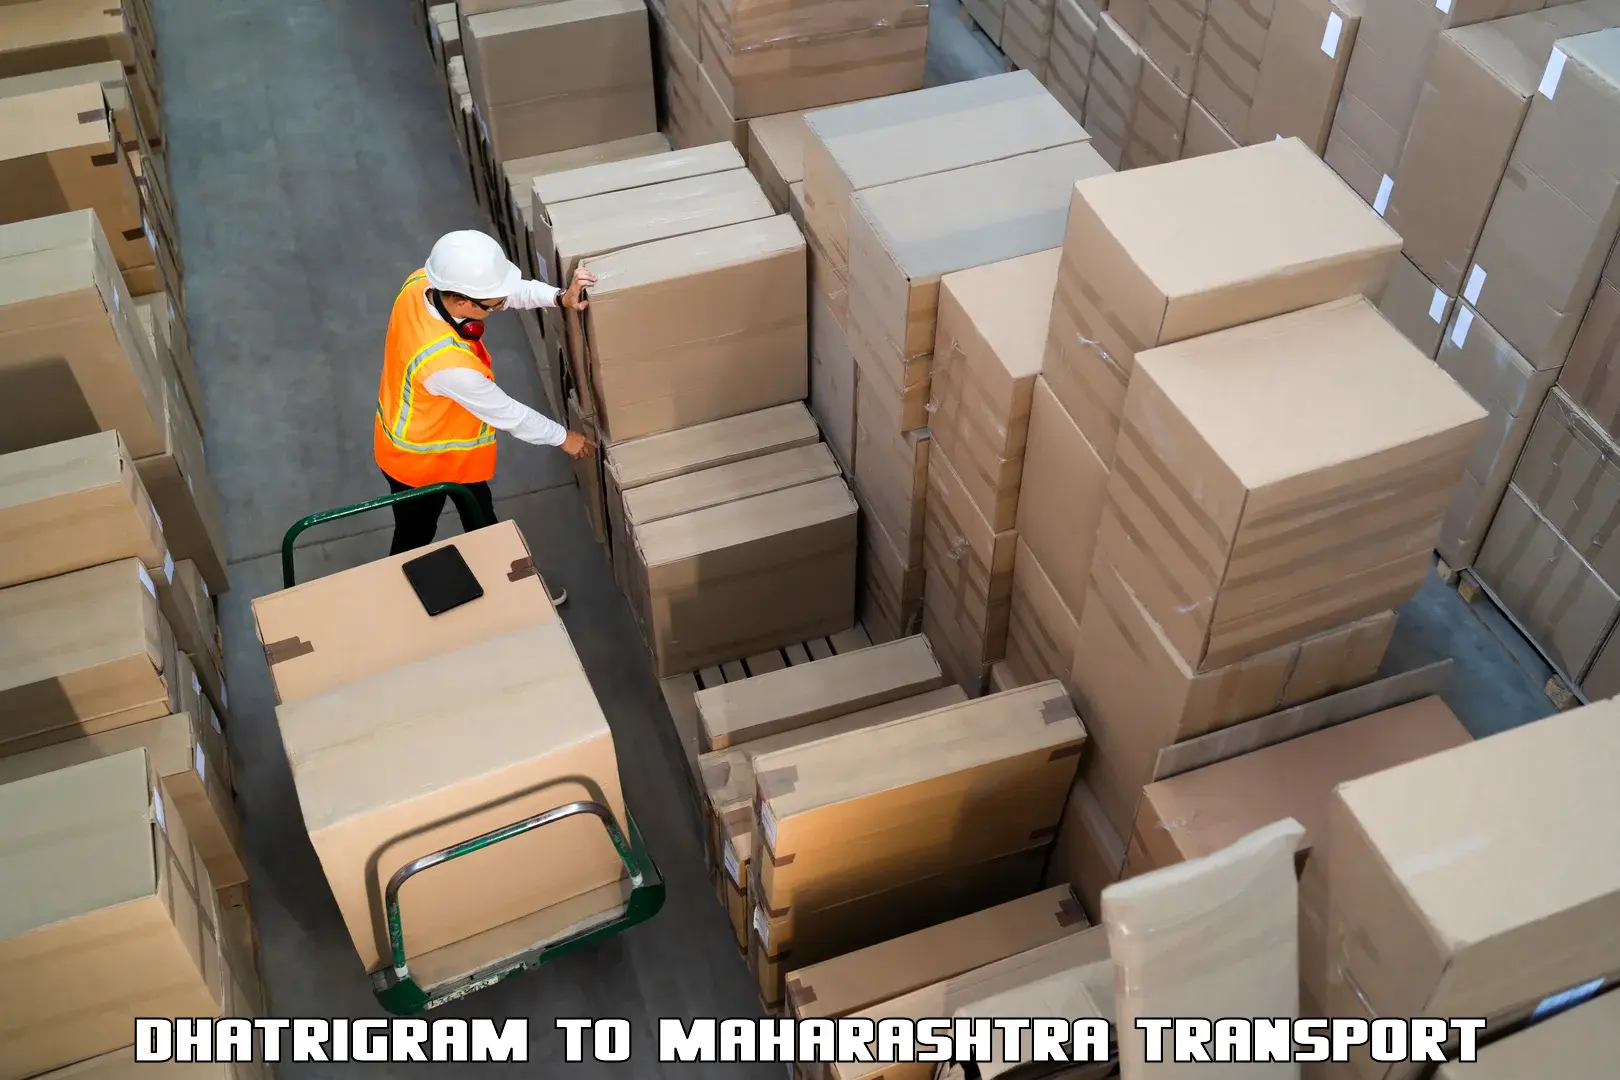 Two wheeler parcel service in Dhatrigram to Talegaon Dabhade